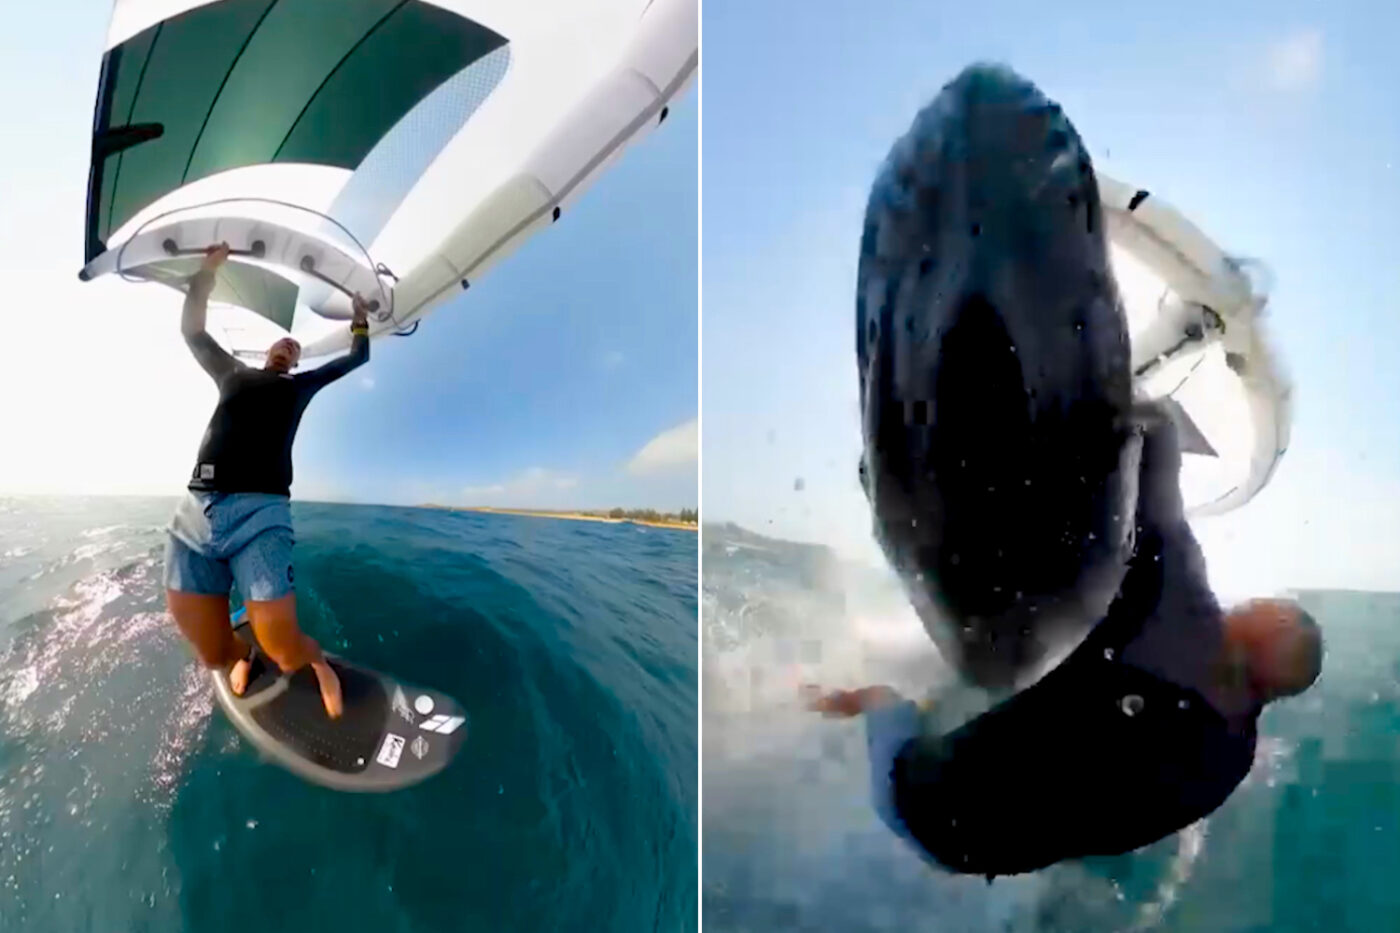 Australian Surfer Bodyslammed By Humpback Whale & Catches Entire Incident On Camera